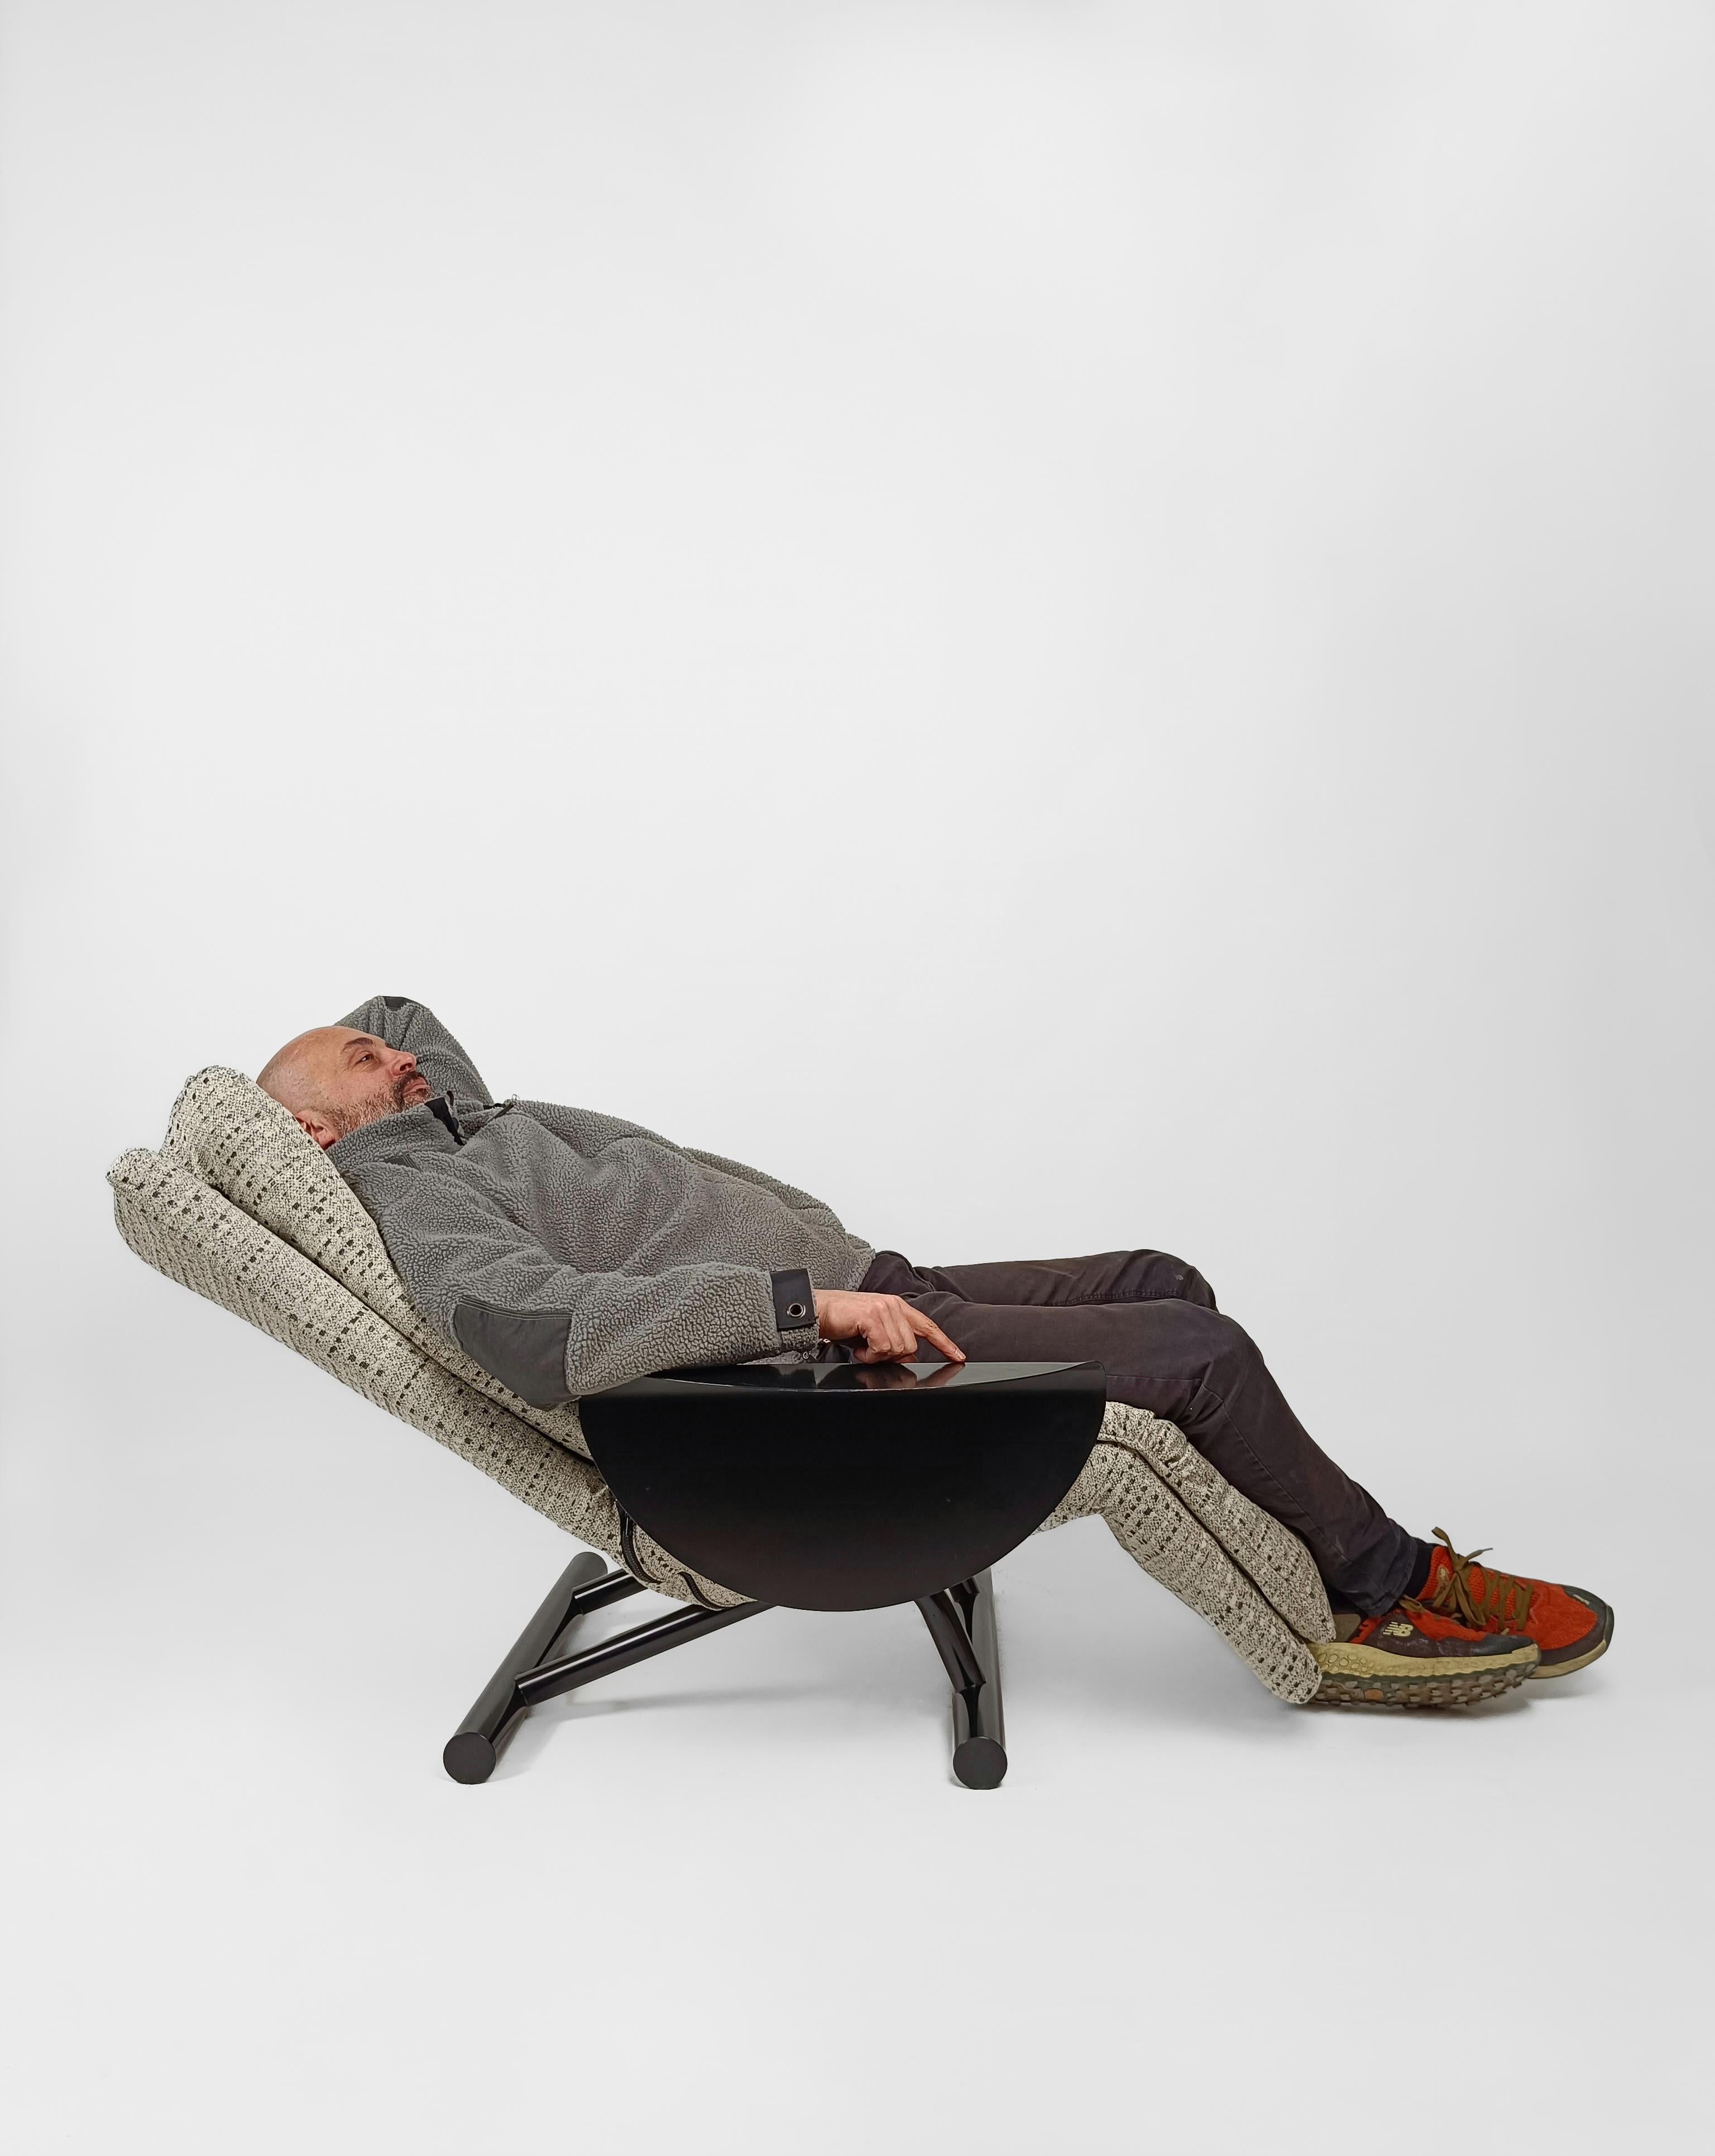 A Post-Modern lounge chair that in a second transforms into a
chaise longue.

All you have to do is raise the armrest, a black metal disc bent with the same naturalness as an origami, decide the inclination of the lounge chair and lower it to lock